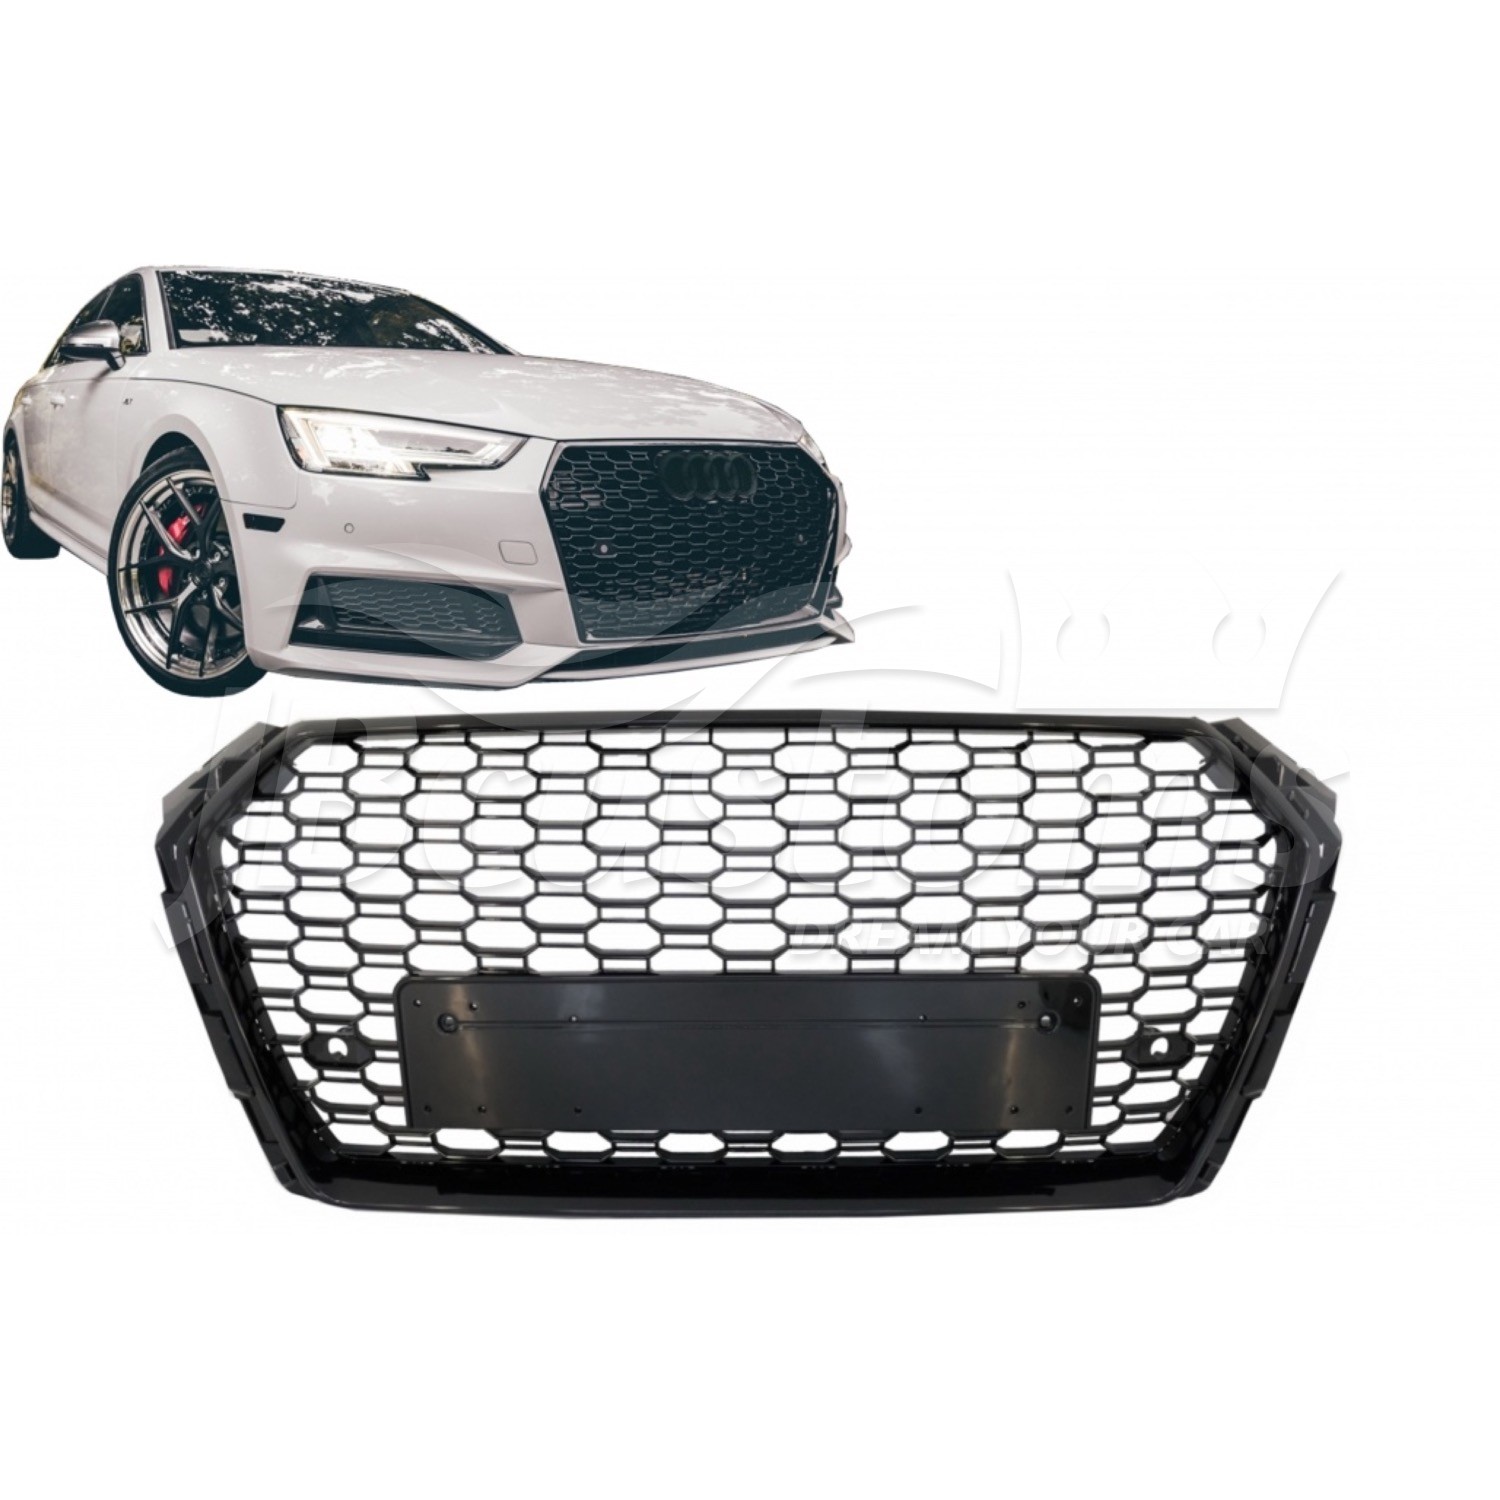 RS4 Style Grill Kühlergrill Wabengrill für AUDI A4 S4 B9 Limo Avant S-Line  15-19